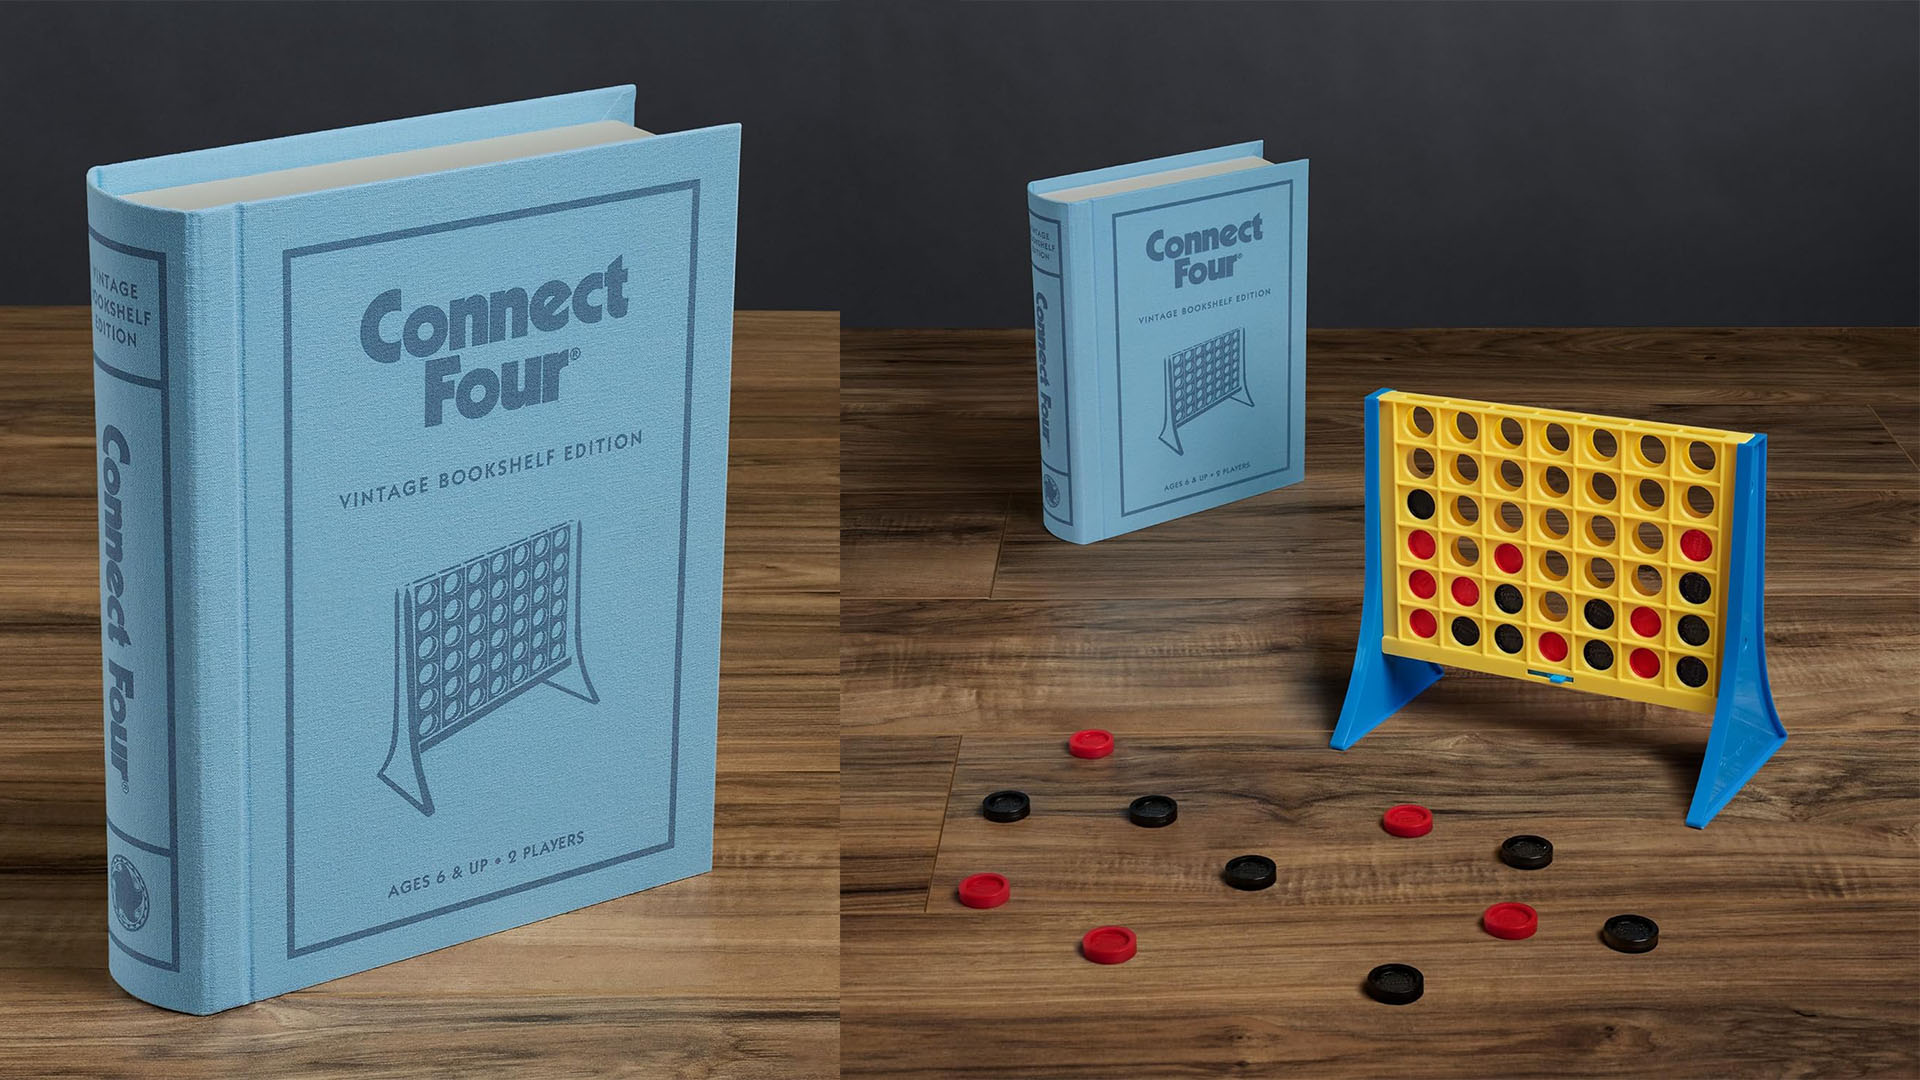 These Board Games Are Disguised As Books – And They Double Up As Great Home  Decor Too - 8days